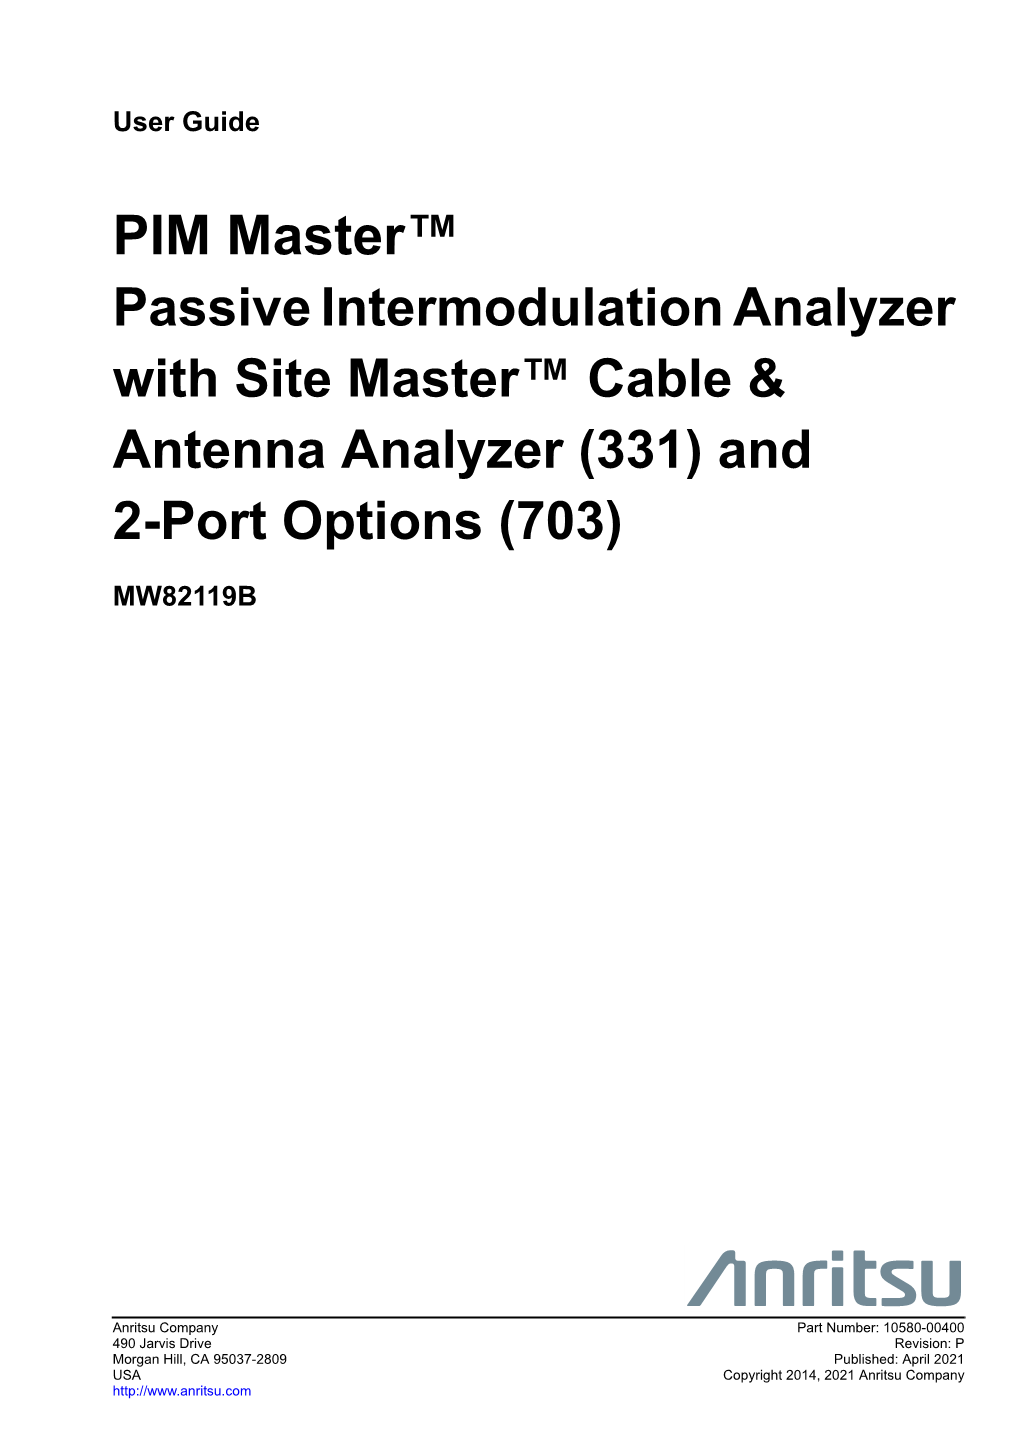 PIM Master MW82119B User Guide Is One of the Set of Manuals That Cover All of the Instrument’S Functions and Uses